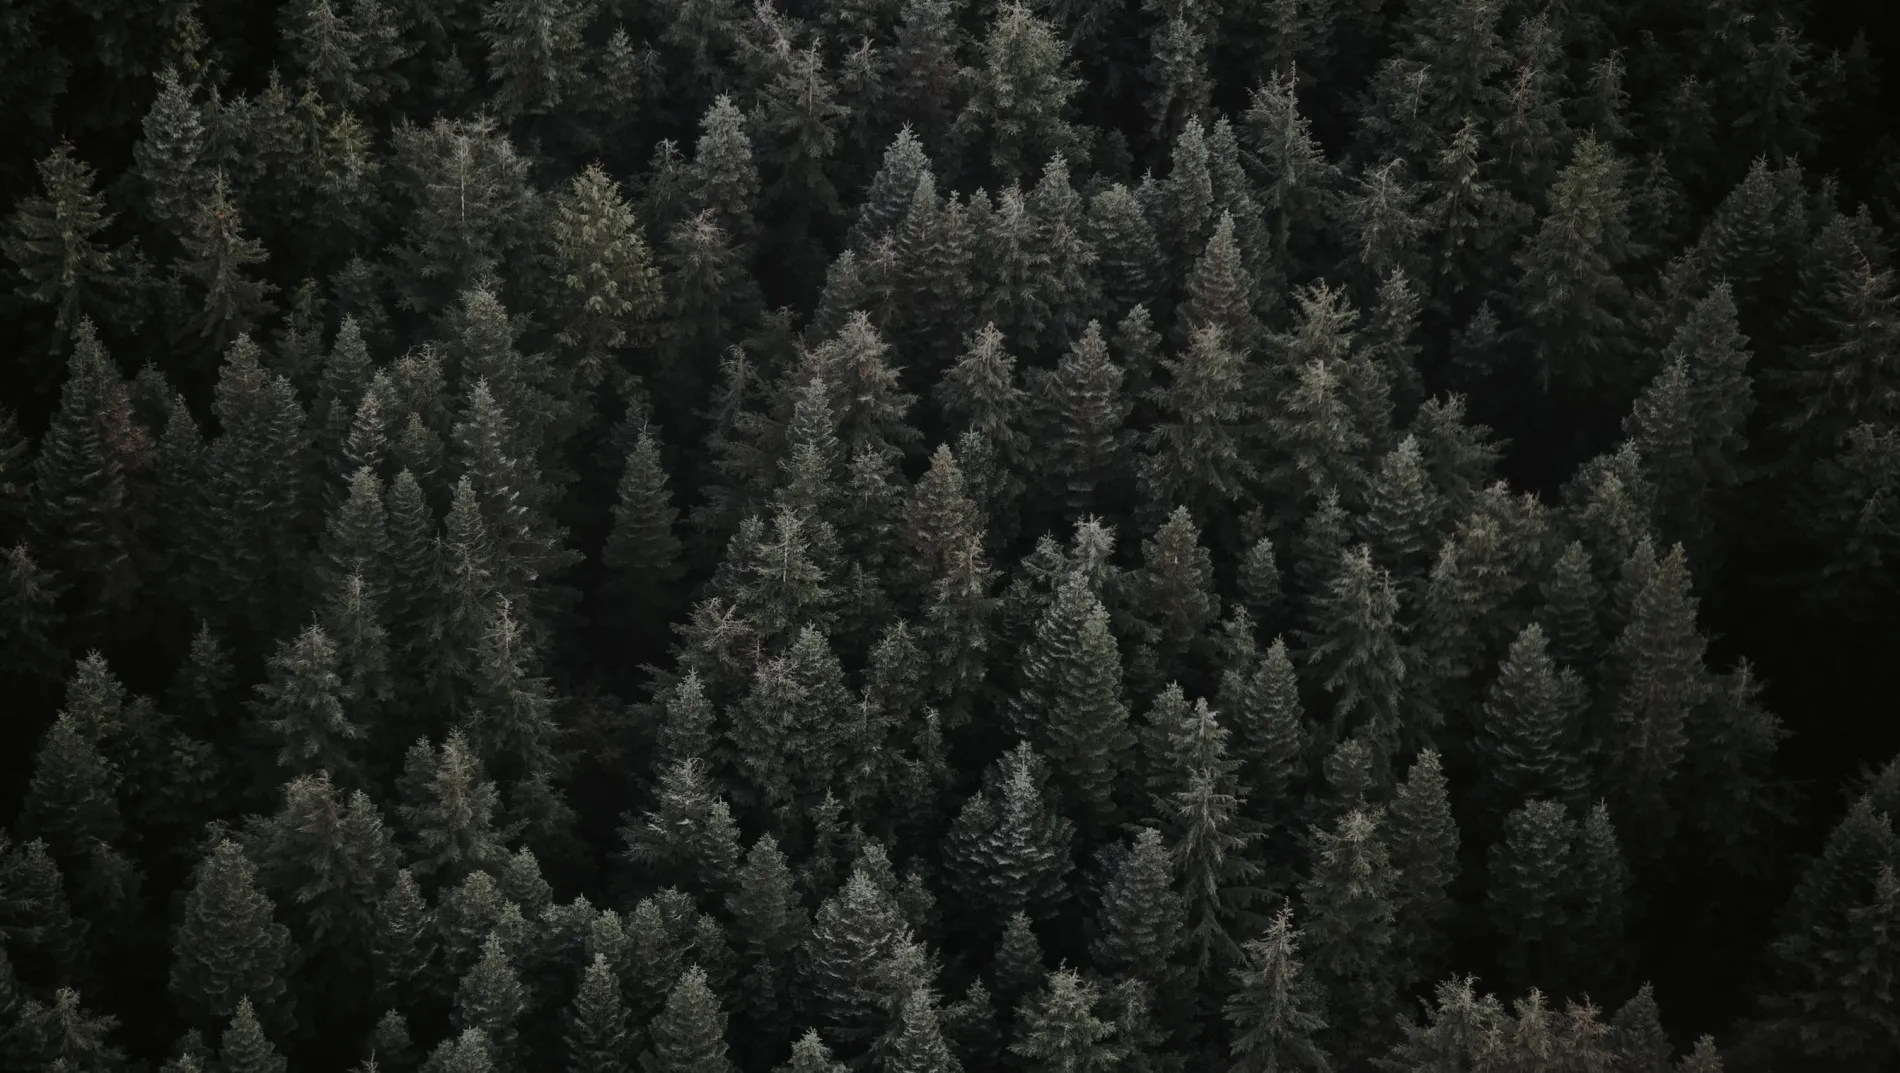 Arial shot of trees